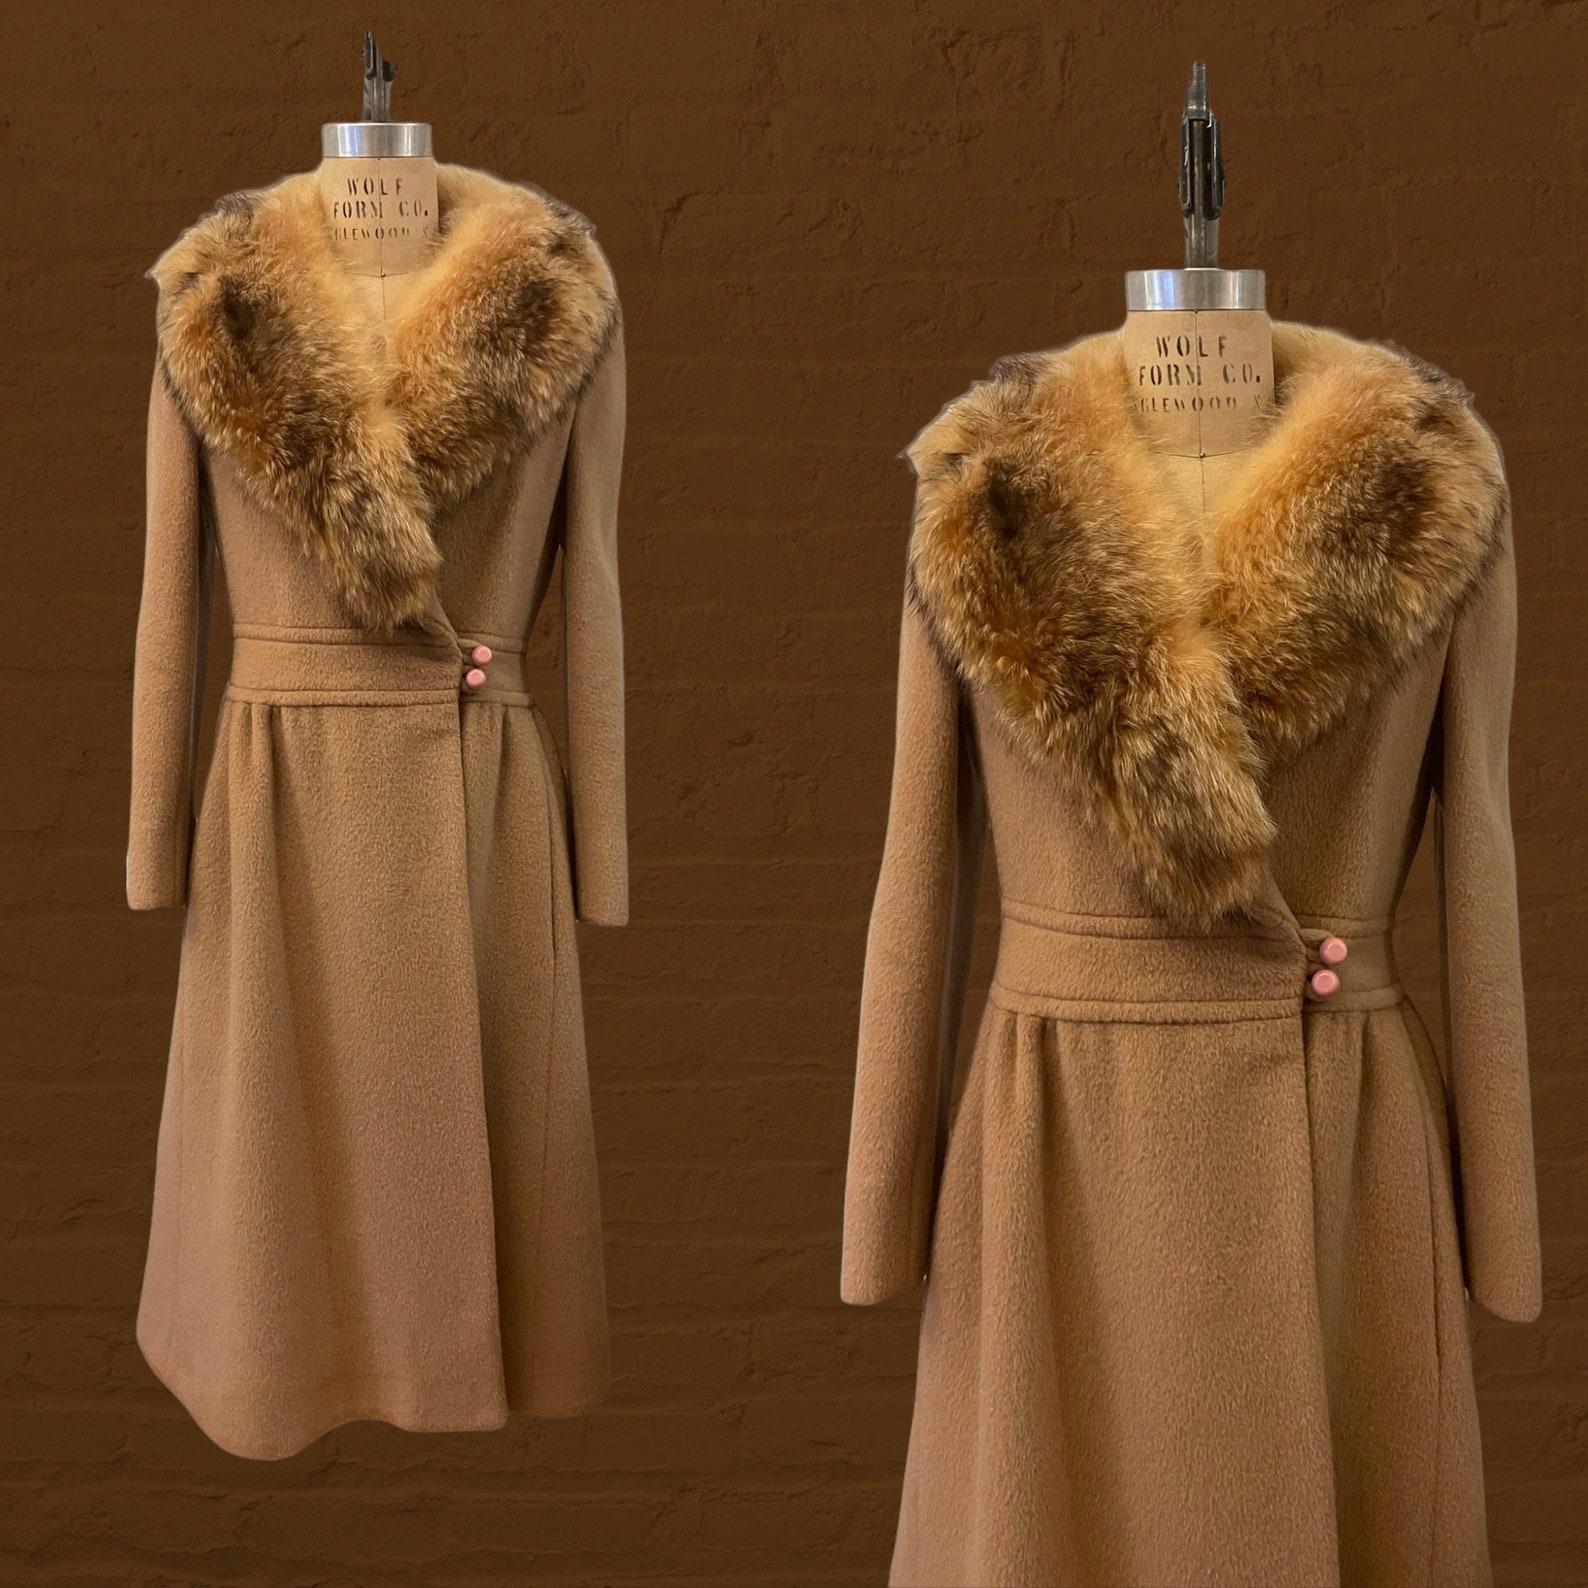 Pierre Cardin camel beige wool princess coat
fit and flare silhouette
notch lapel fox fur collar
princess seams
banded waist
blush pink buttons at waist & sleeve cuffs
two button closure at left side gives this coat a wrap style look
hip